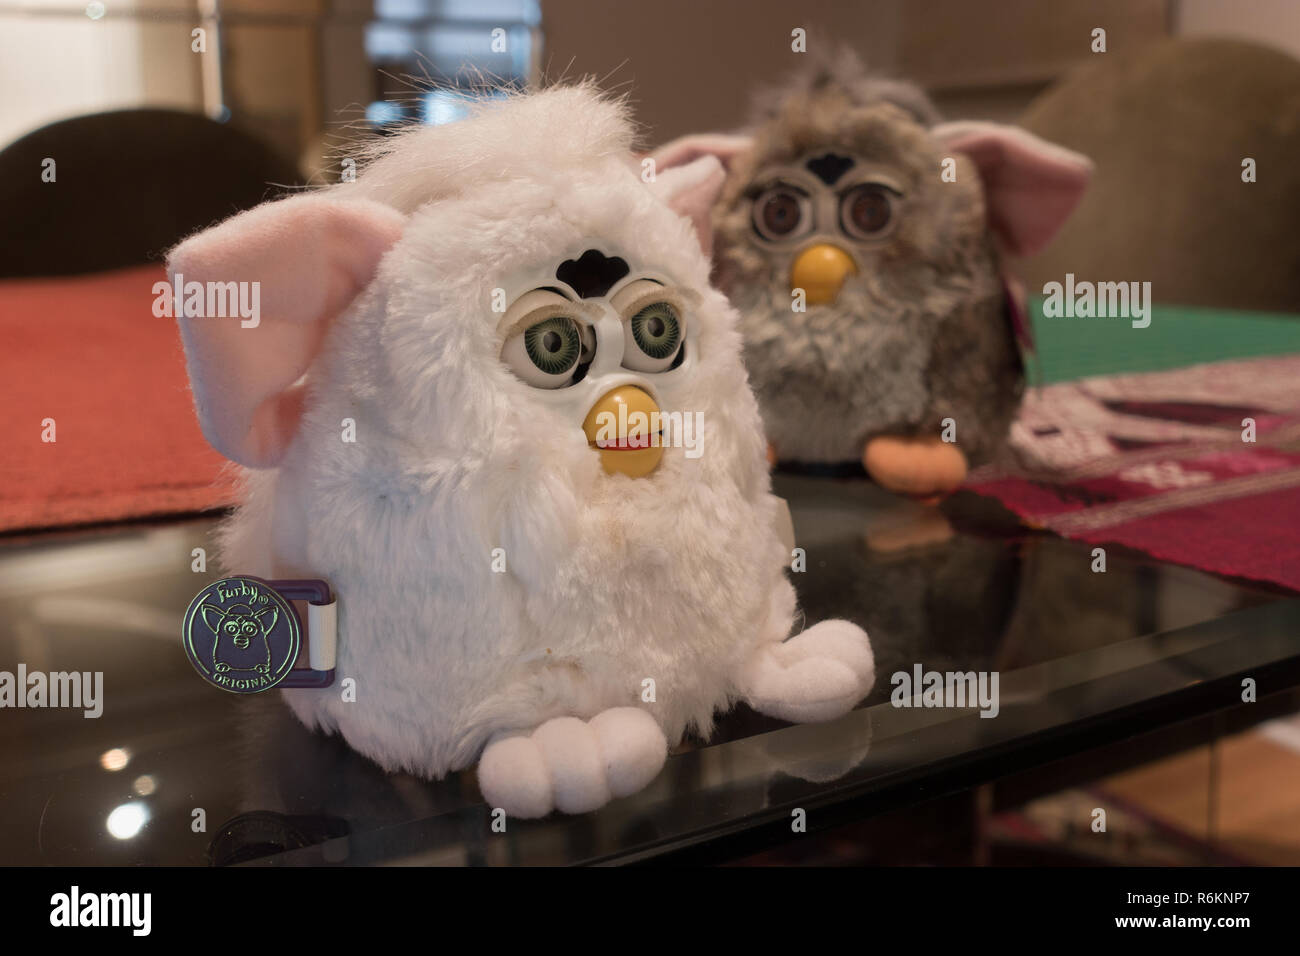 Original Furby and Furby baby (white), must-have intelligent speaking toys from 1998 and 1999 (baby), made by Tiger electronics, await conversation. Stock Photo